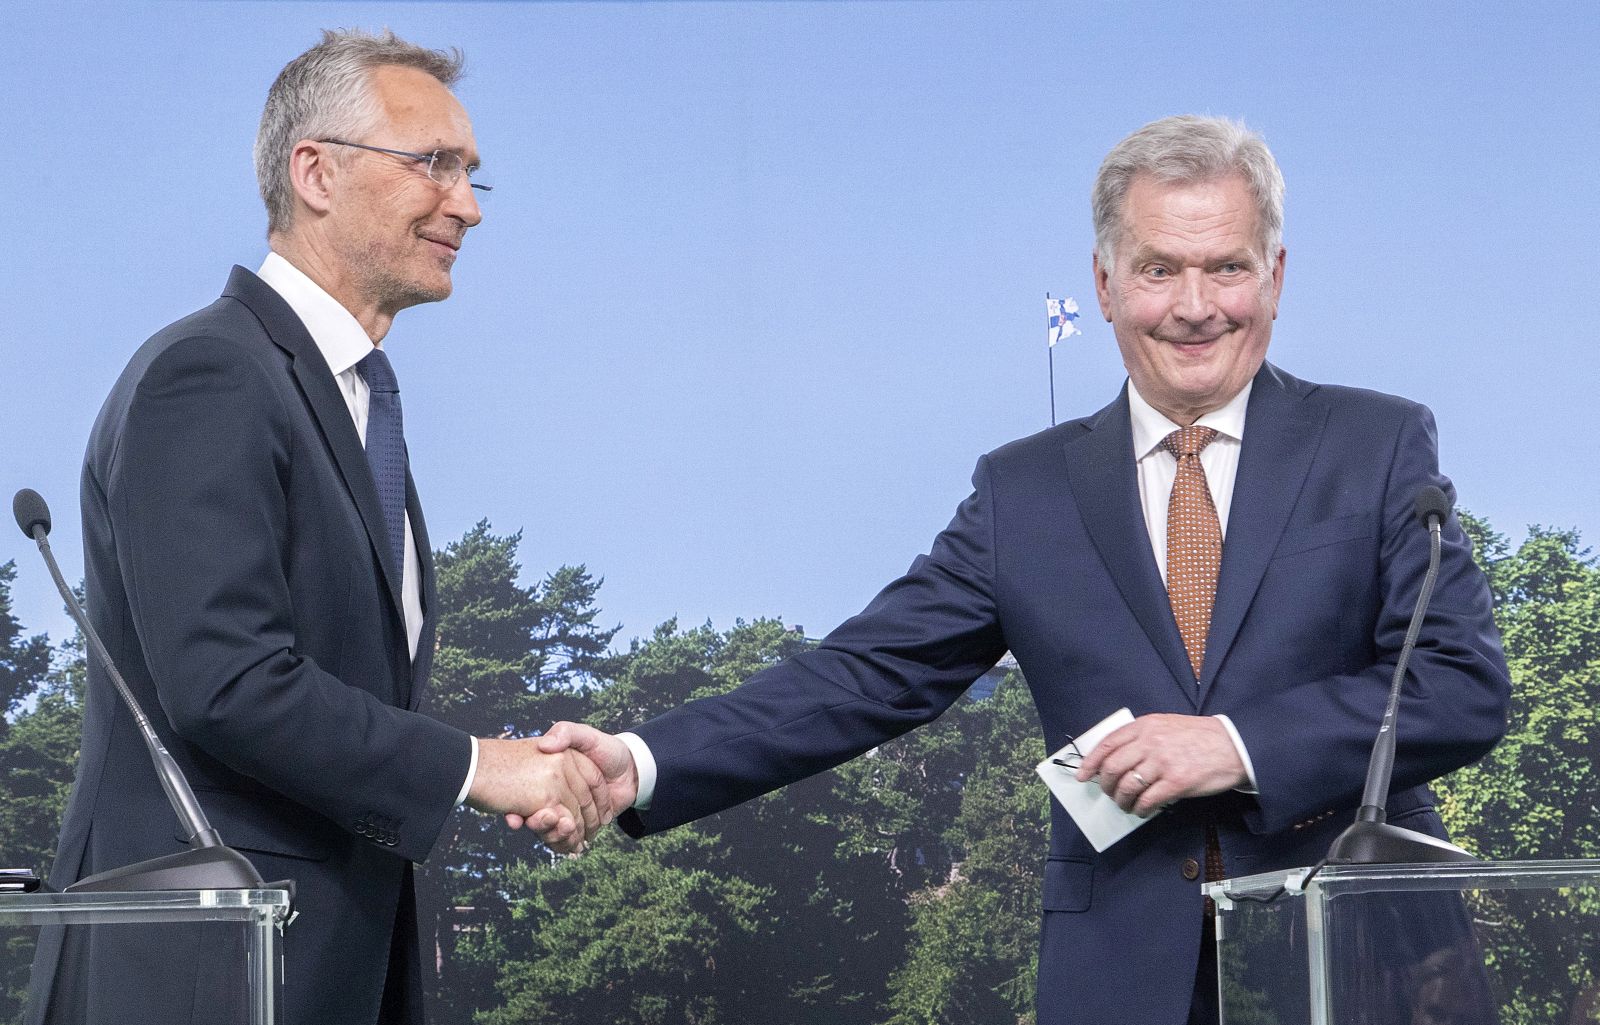 epa10009610 Finland President Sauli Niinisto (R) and Nato Secretary General Jens Stoltenberg (L) during a press conference at The Kultaranta Talks in Naantali Finland, Finland, 12 June 2022. The Kultaranta Talks is being hosted by President Sauli Niinisto on 12-13 June 2022. This year, the title of this foreing and security policy discussion event is 'Responsible, strong and stable Nordic region'. The main guests are NATO Secretary General Jens Stoltenberg and Prime Minister of Norway Jonas Gahr Store at the Presidential summer residence Kultaranta, located on the island of Luonnonmaa.  EPA/MAURI RATILAINEN